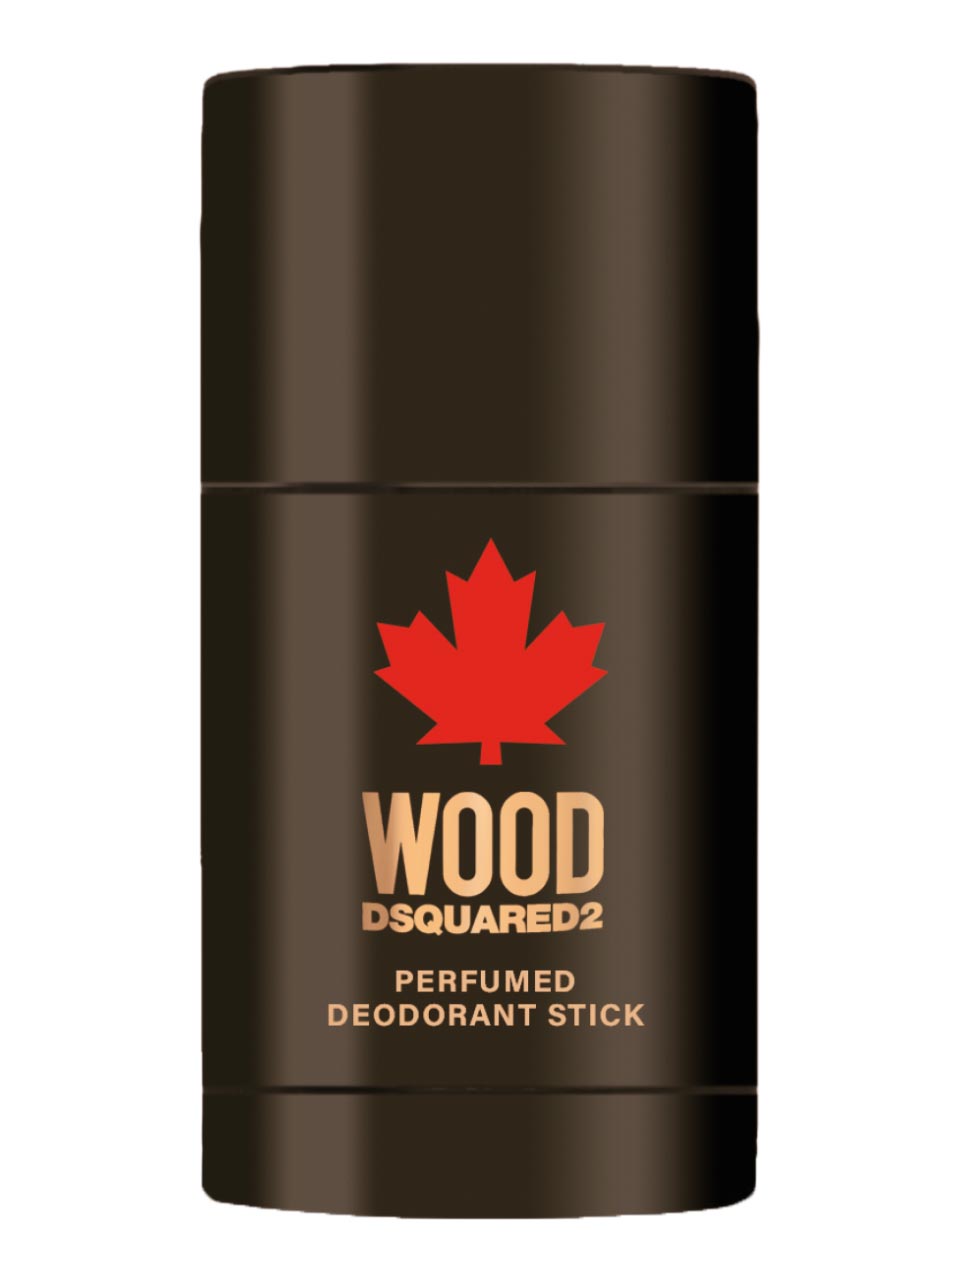 Dsquared2 Wood Pour Homme Deodorant Stick 75 g null - onesize - 1